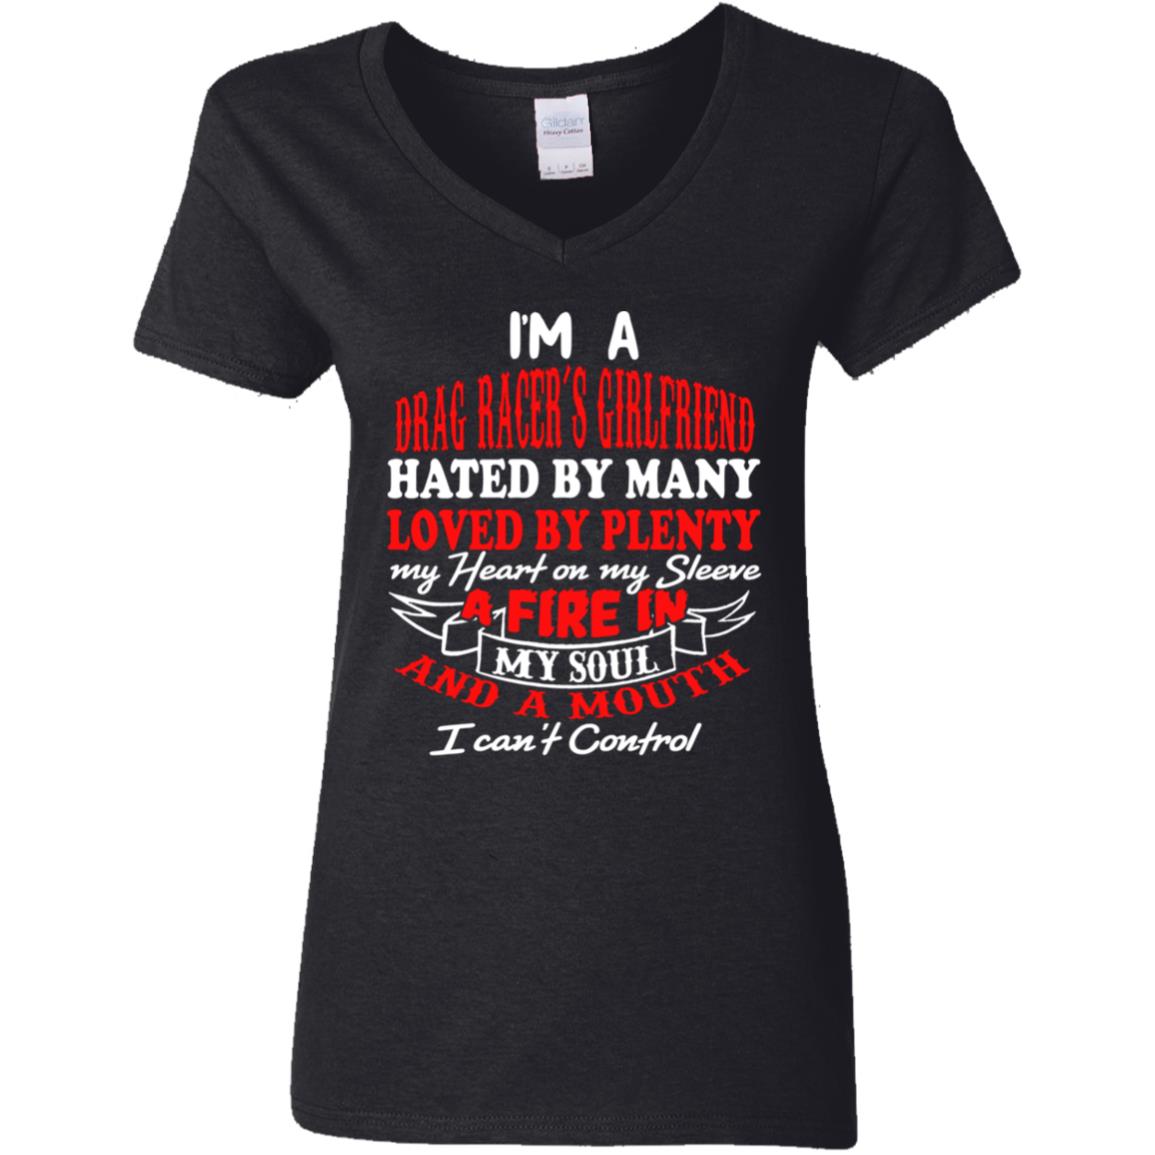 I'm A Drag Racer's Girlfriend Hated By Many Loved By Plenty Ladies' 5.3 oz. V-Neck T-Shirt